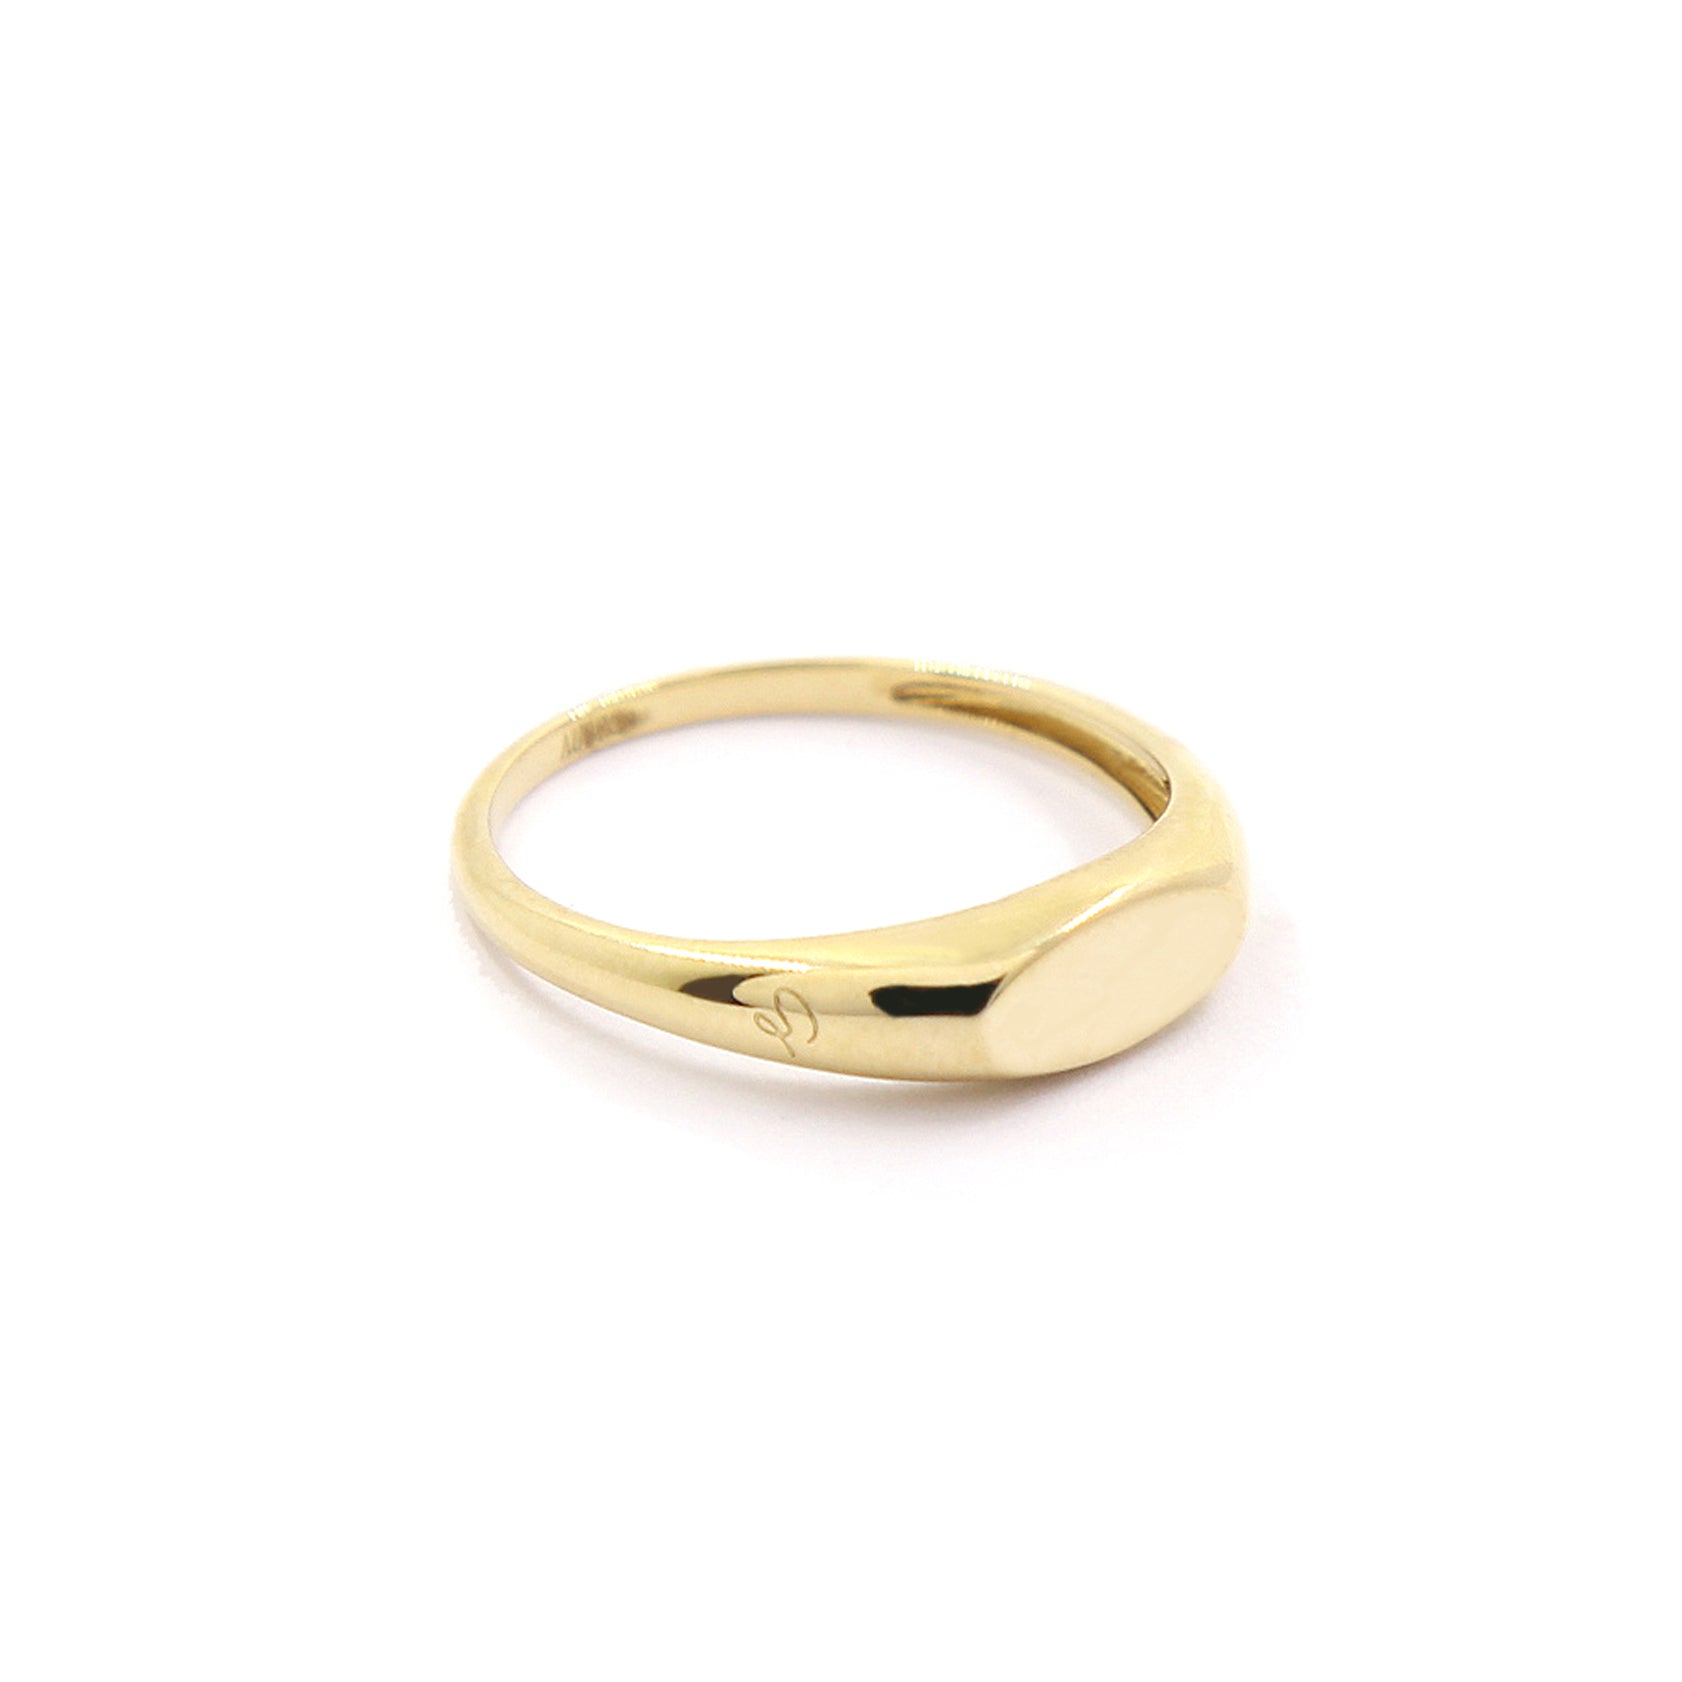 9K GOLD ANDREA SMALL OVAL SIGNET RING